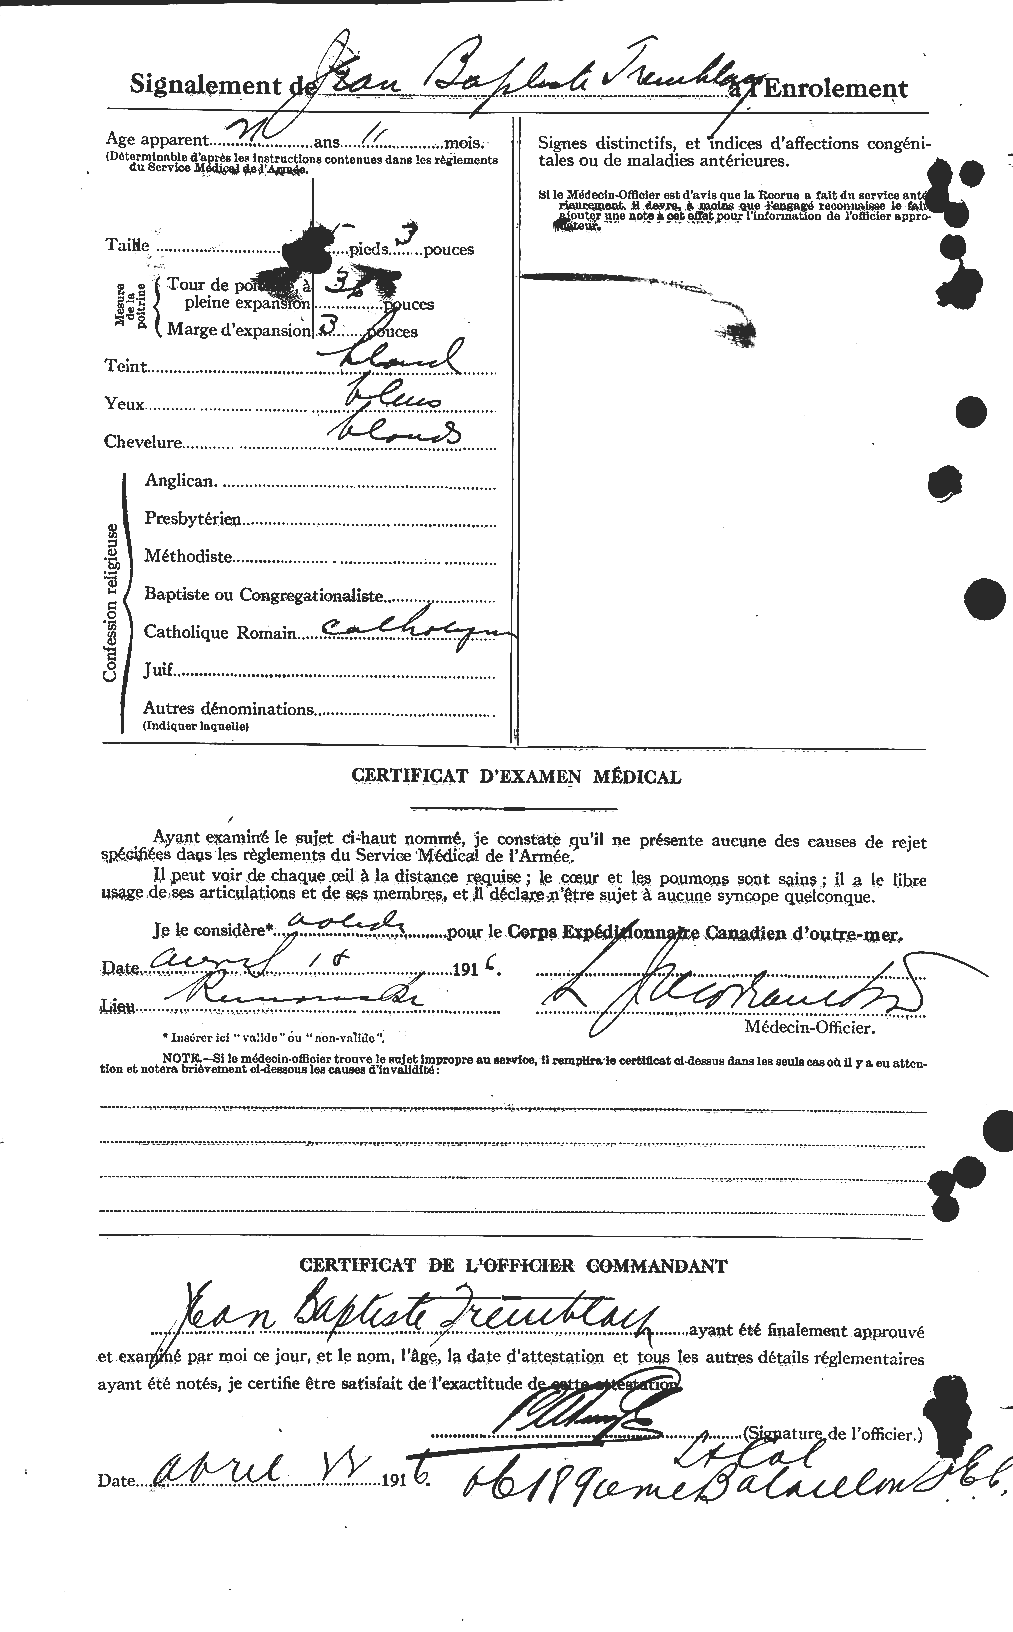 Personnel Records of the First World War - CEF 639098b